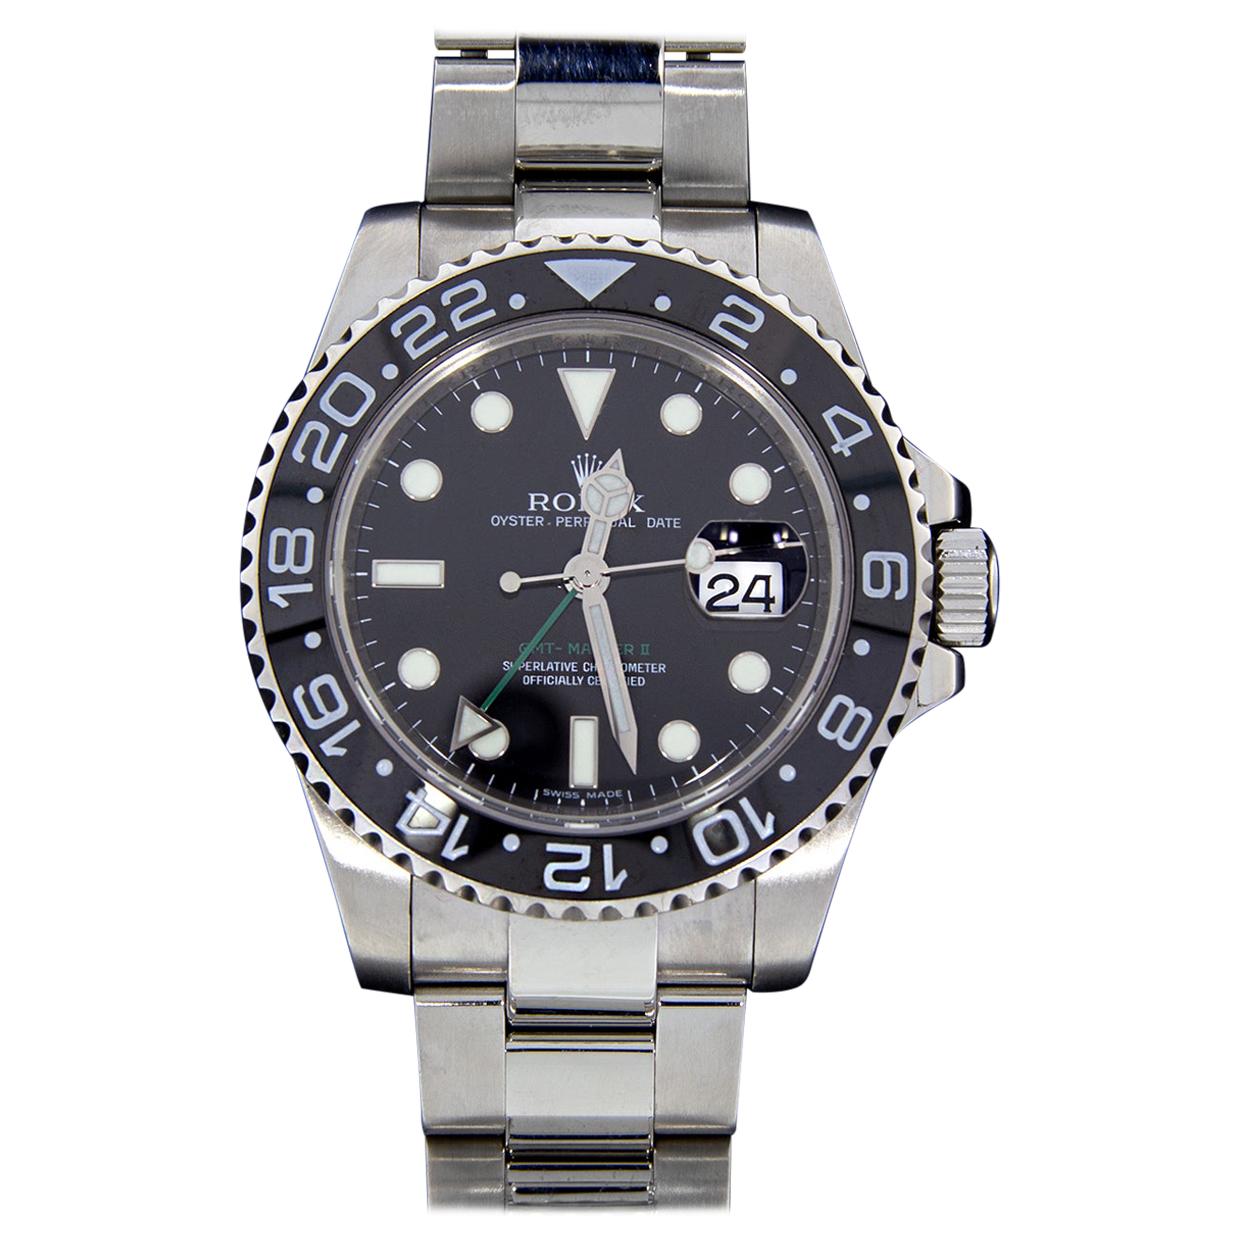 Rolex GMT Master II Stainless Steel Watch with Black Dial, Model 116710LN